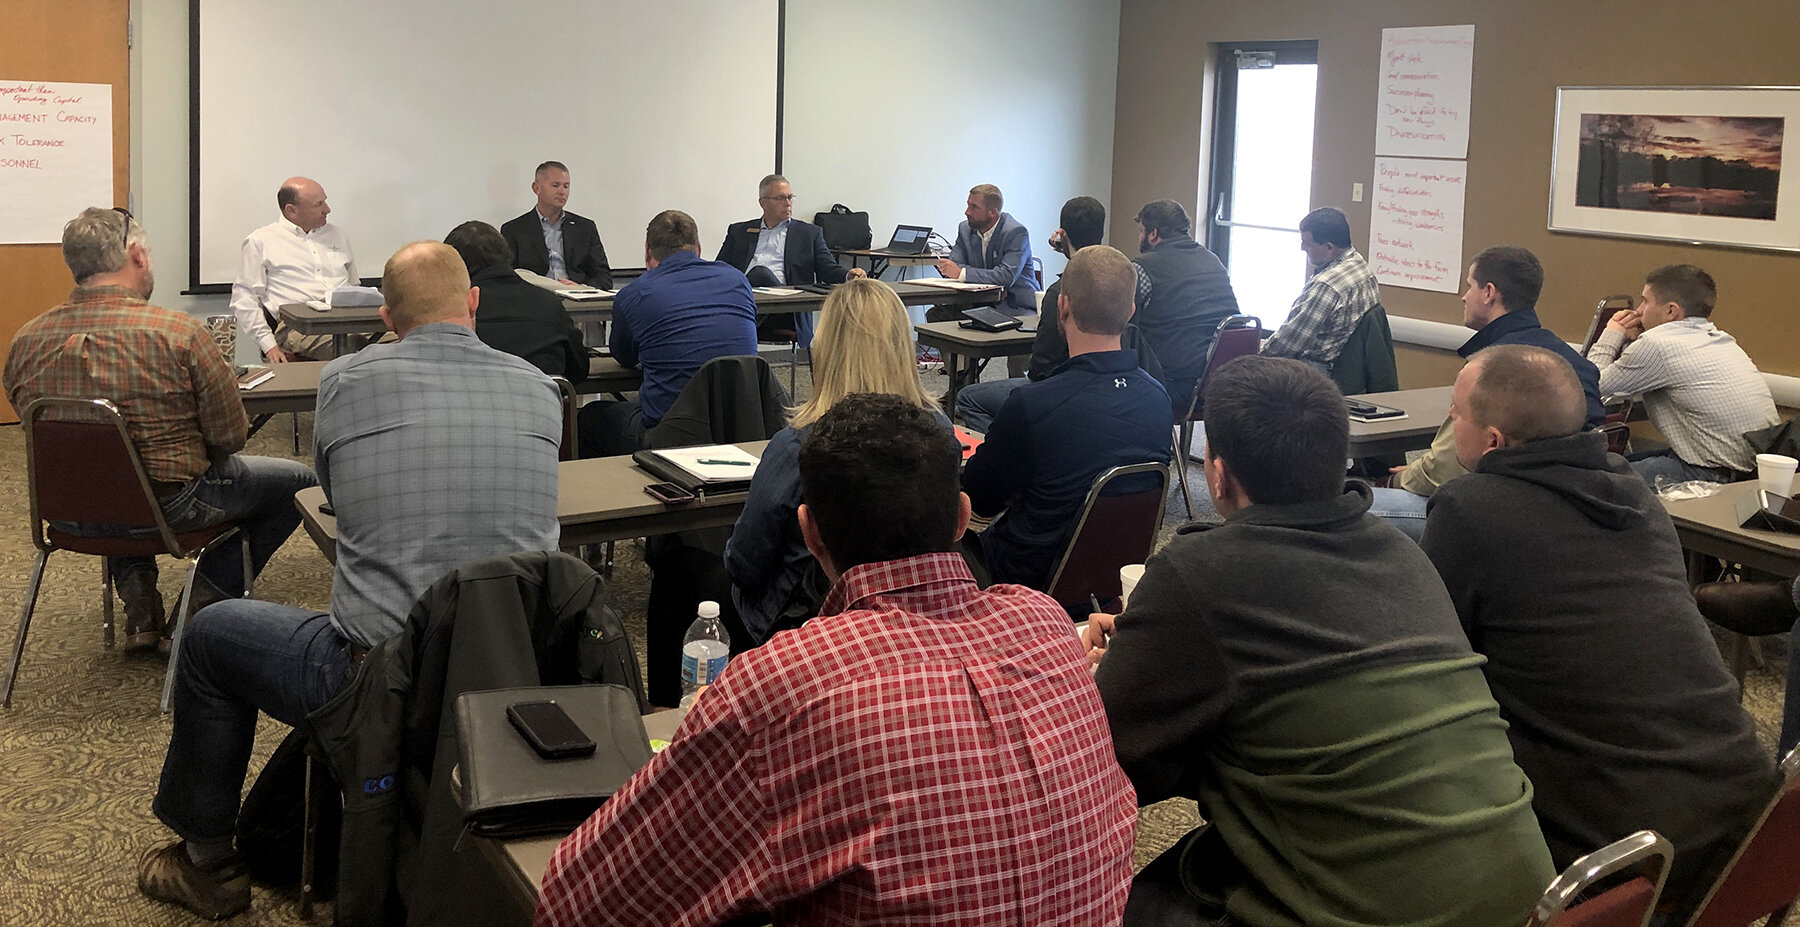 Clint Hardy moderates a panel discussion of ag lenders Wayne Mattingly, Brandon Garnett and Doug Lawson to provide banks’ perspectives and share advice with participants about credit strategies in a difficult grain farming economy.